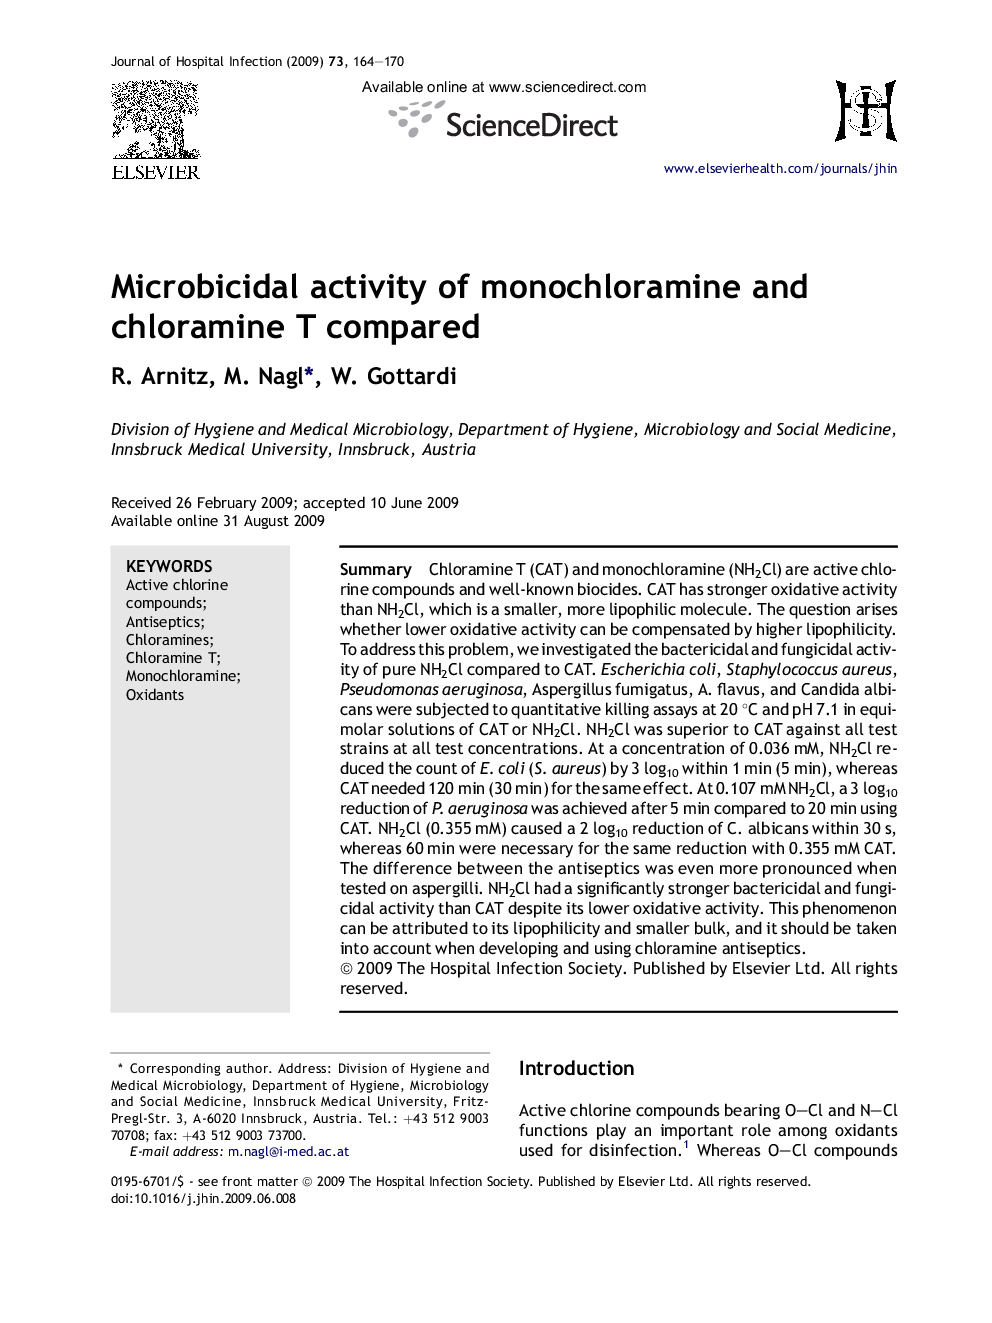 Microbicidal activity of monochloramine and chloramine T compared